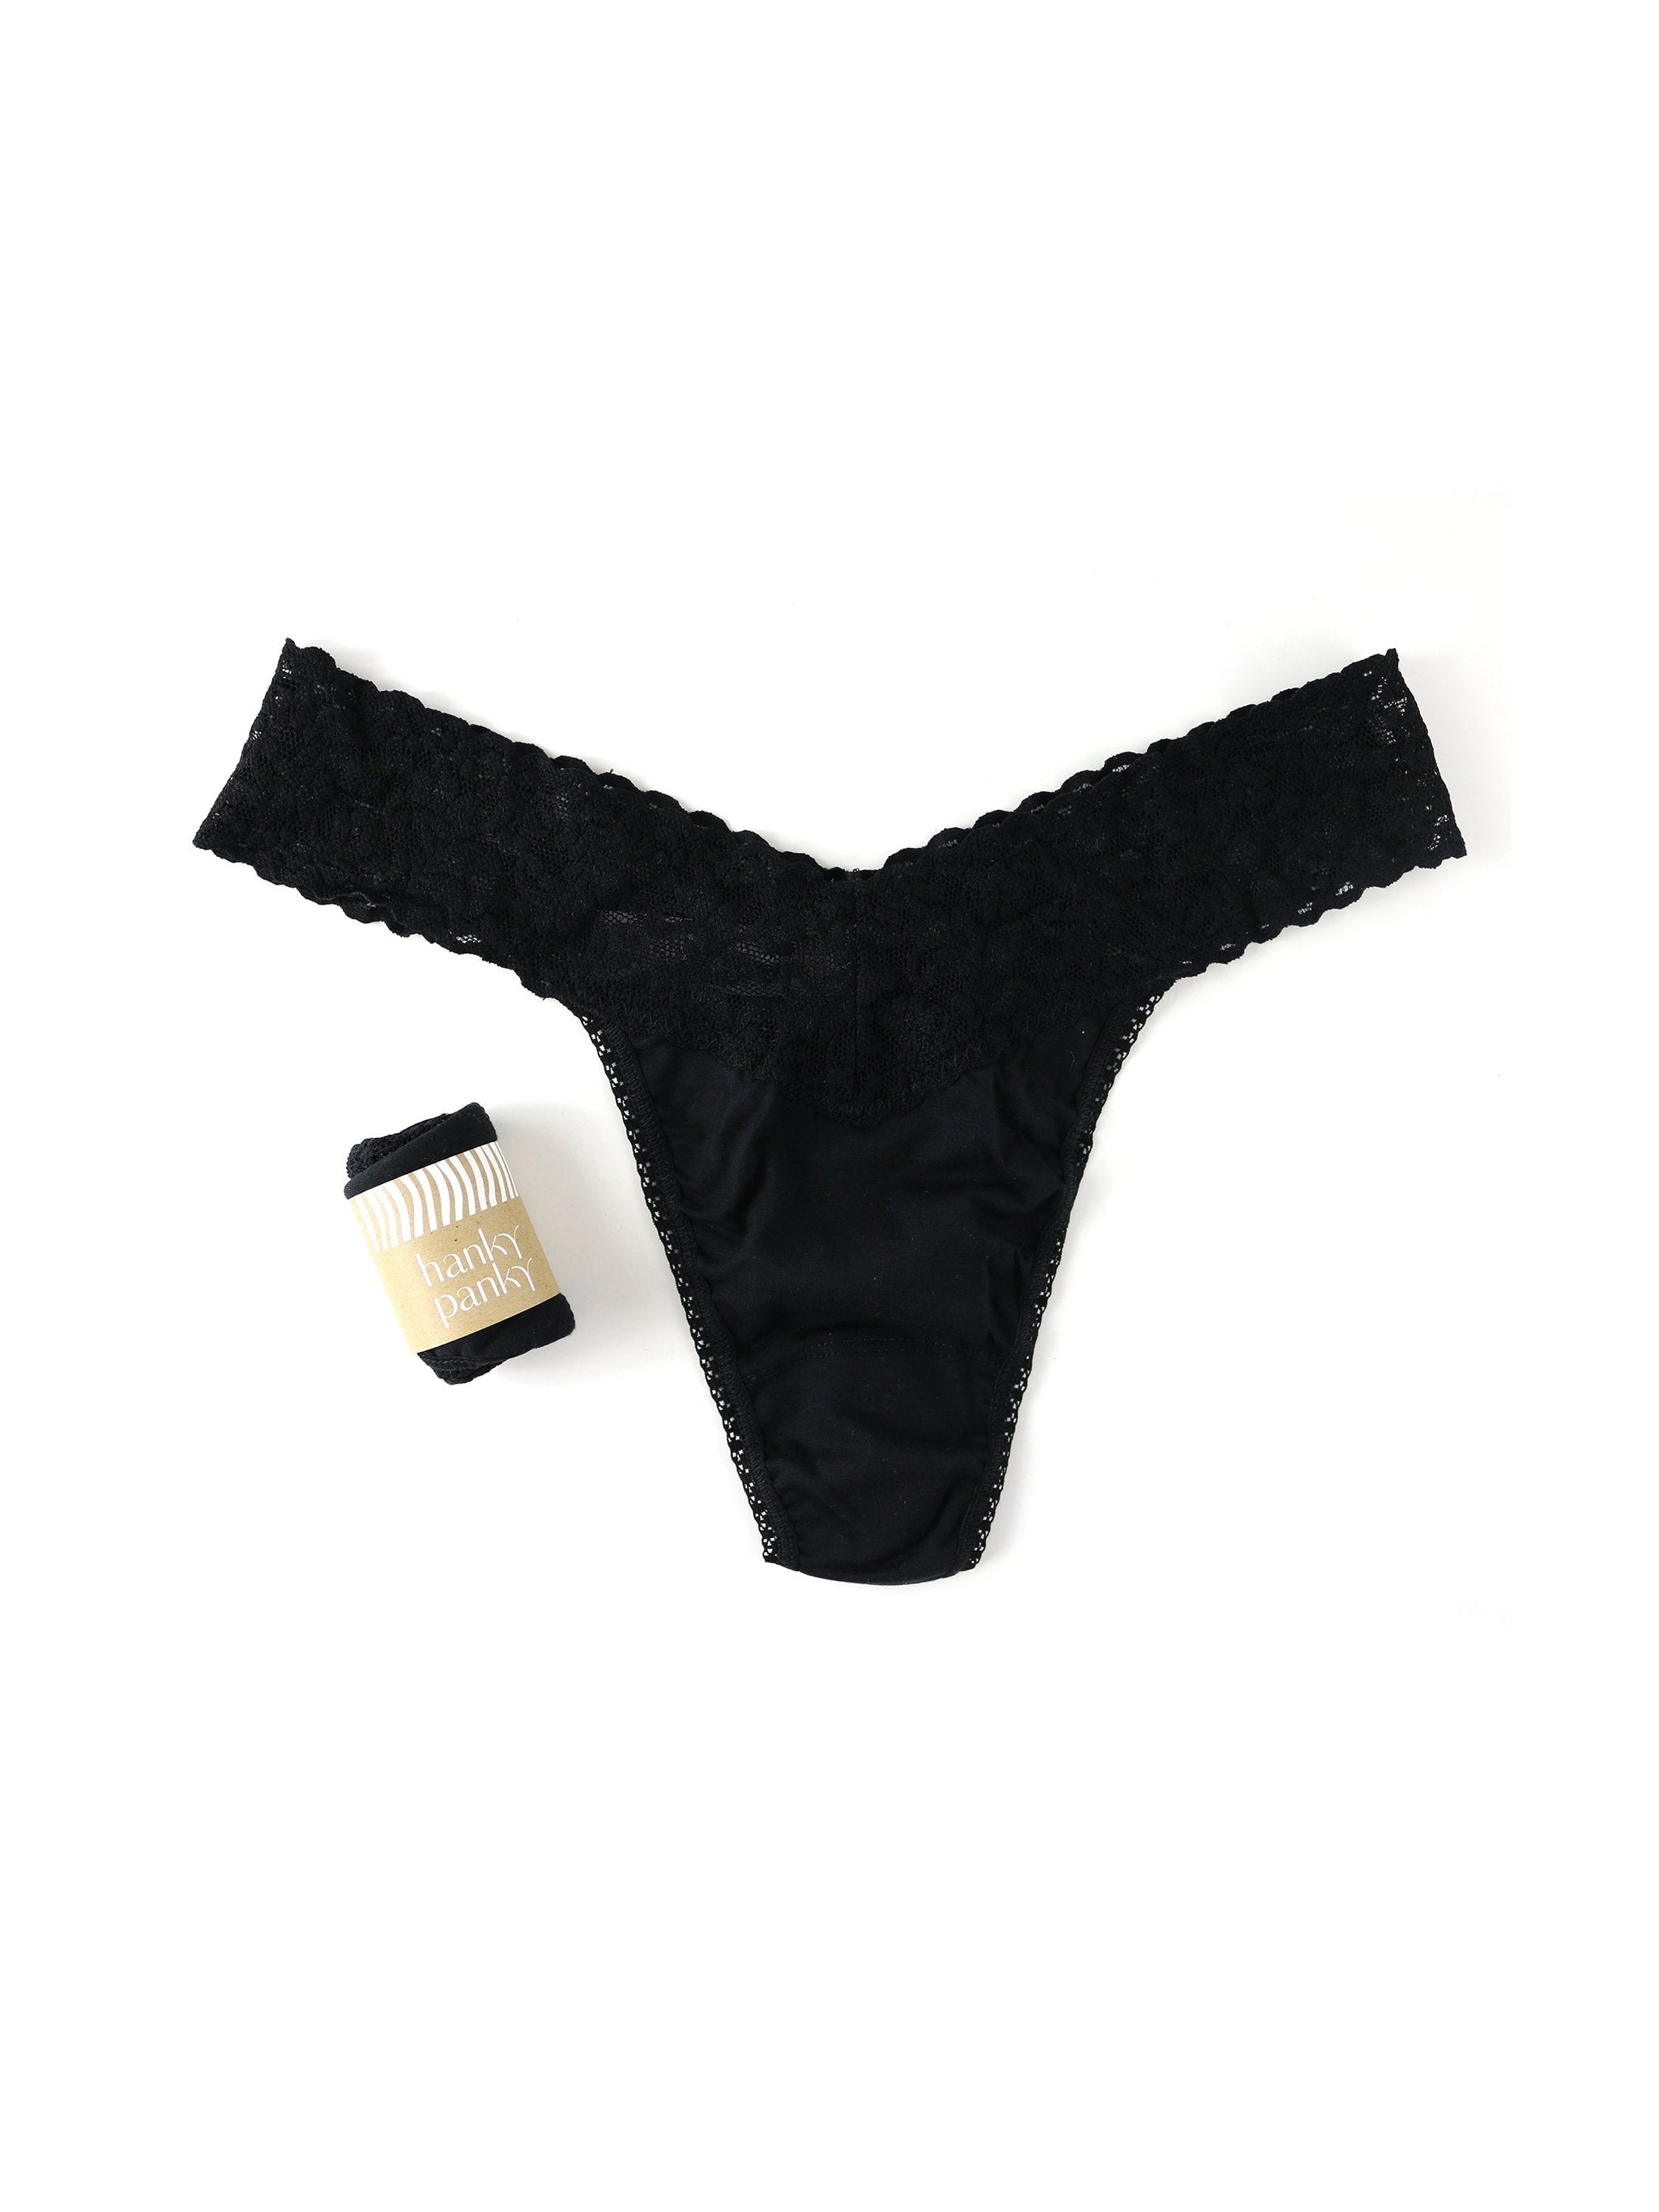 Ying Young - Everyday Essentials Classic Slip Panties Black XS